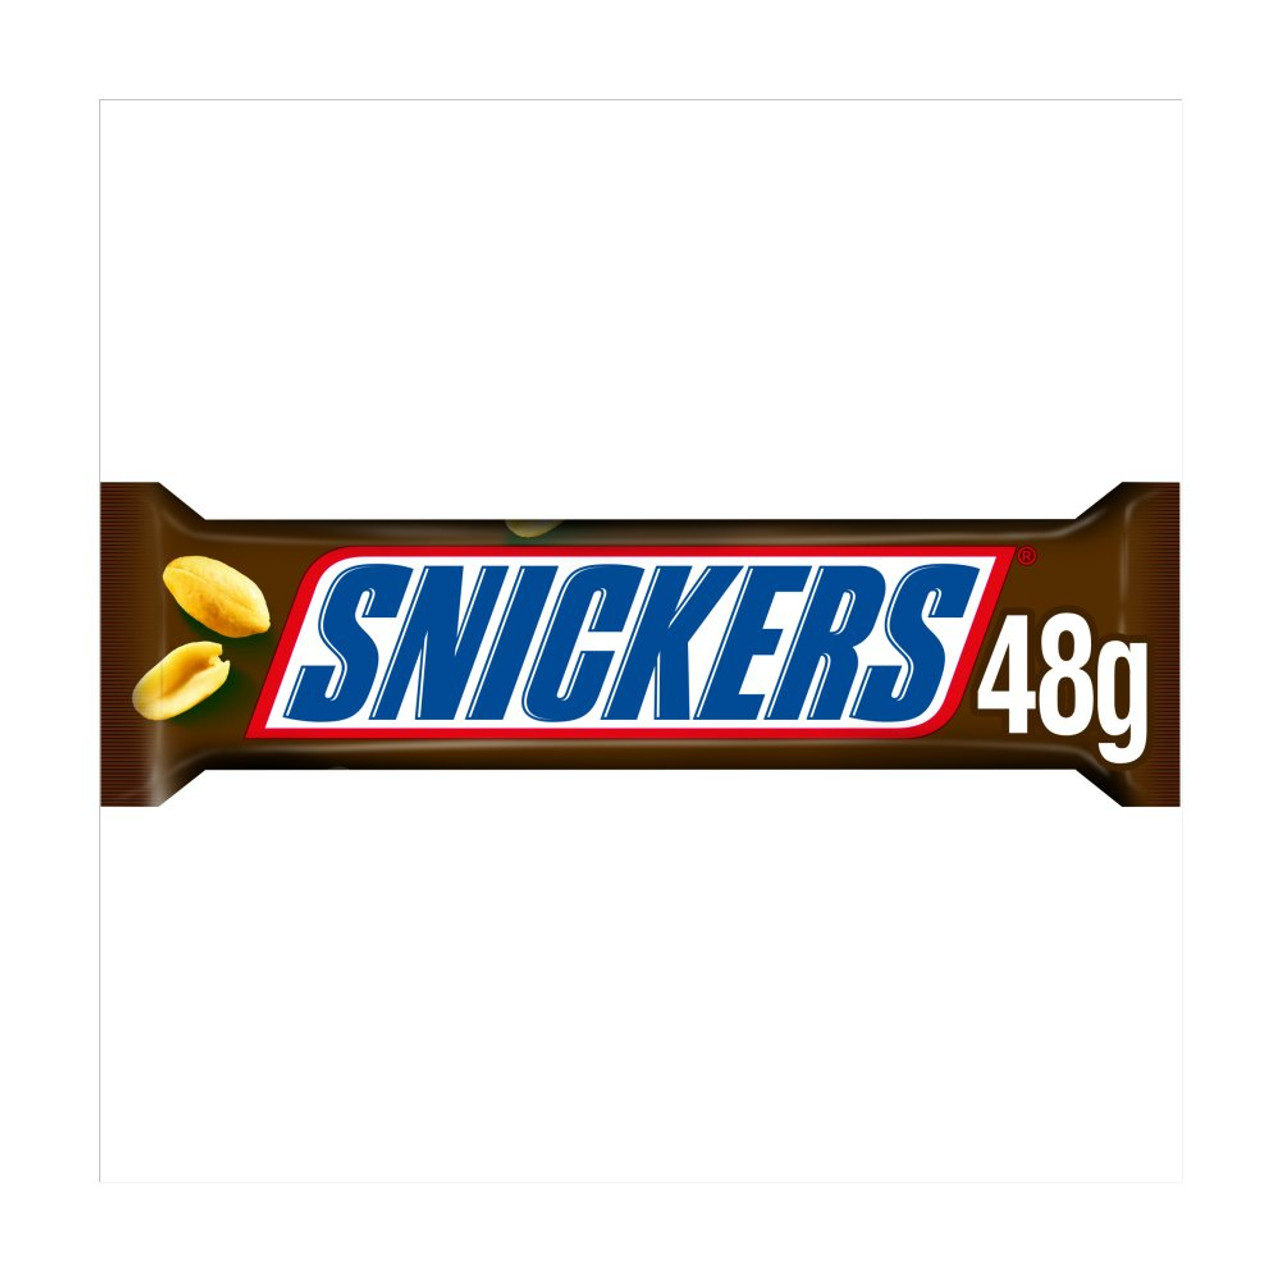 SNICKERS Variety Mix Fun Size Chocolate Candy Bars, 32.68-Ounce Bag